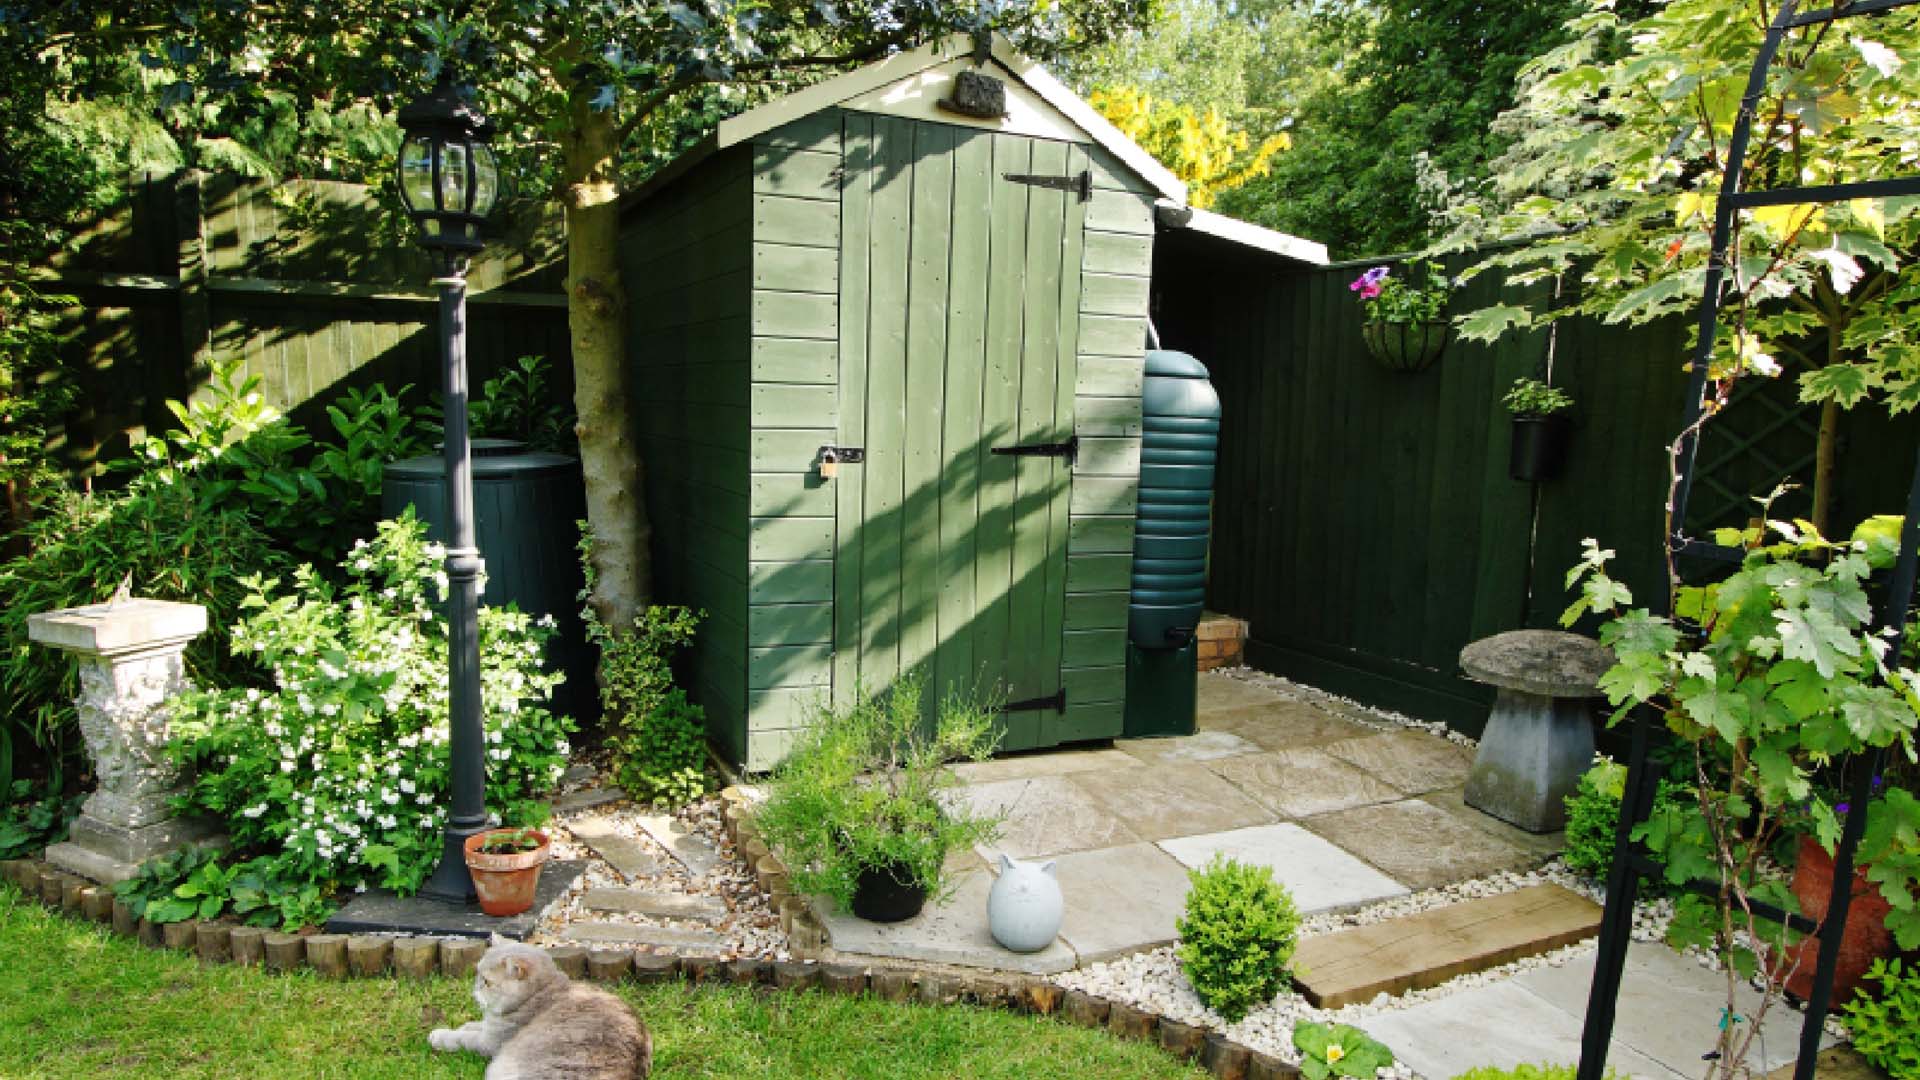 Green garden shed in the  back of a garden with cat sat on lawn